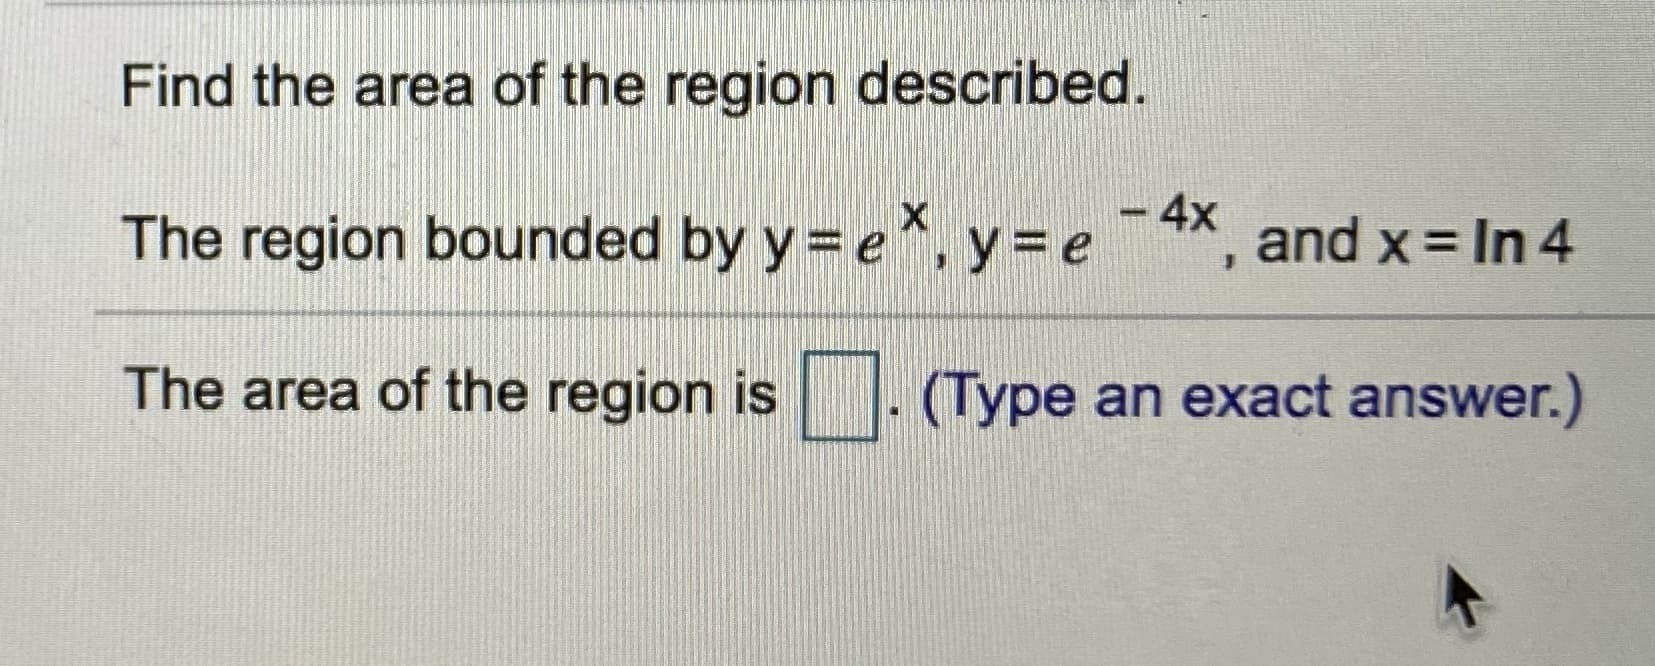 Find the area of the region described.
-4x
The region bounded by y = e*, y = e¯X, and x = In 4
The area of the region is
(Type an exact answer.)
